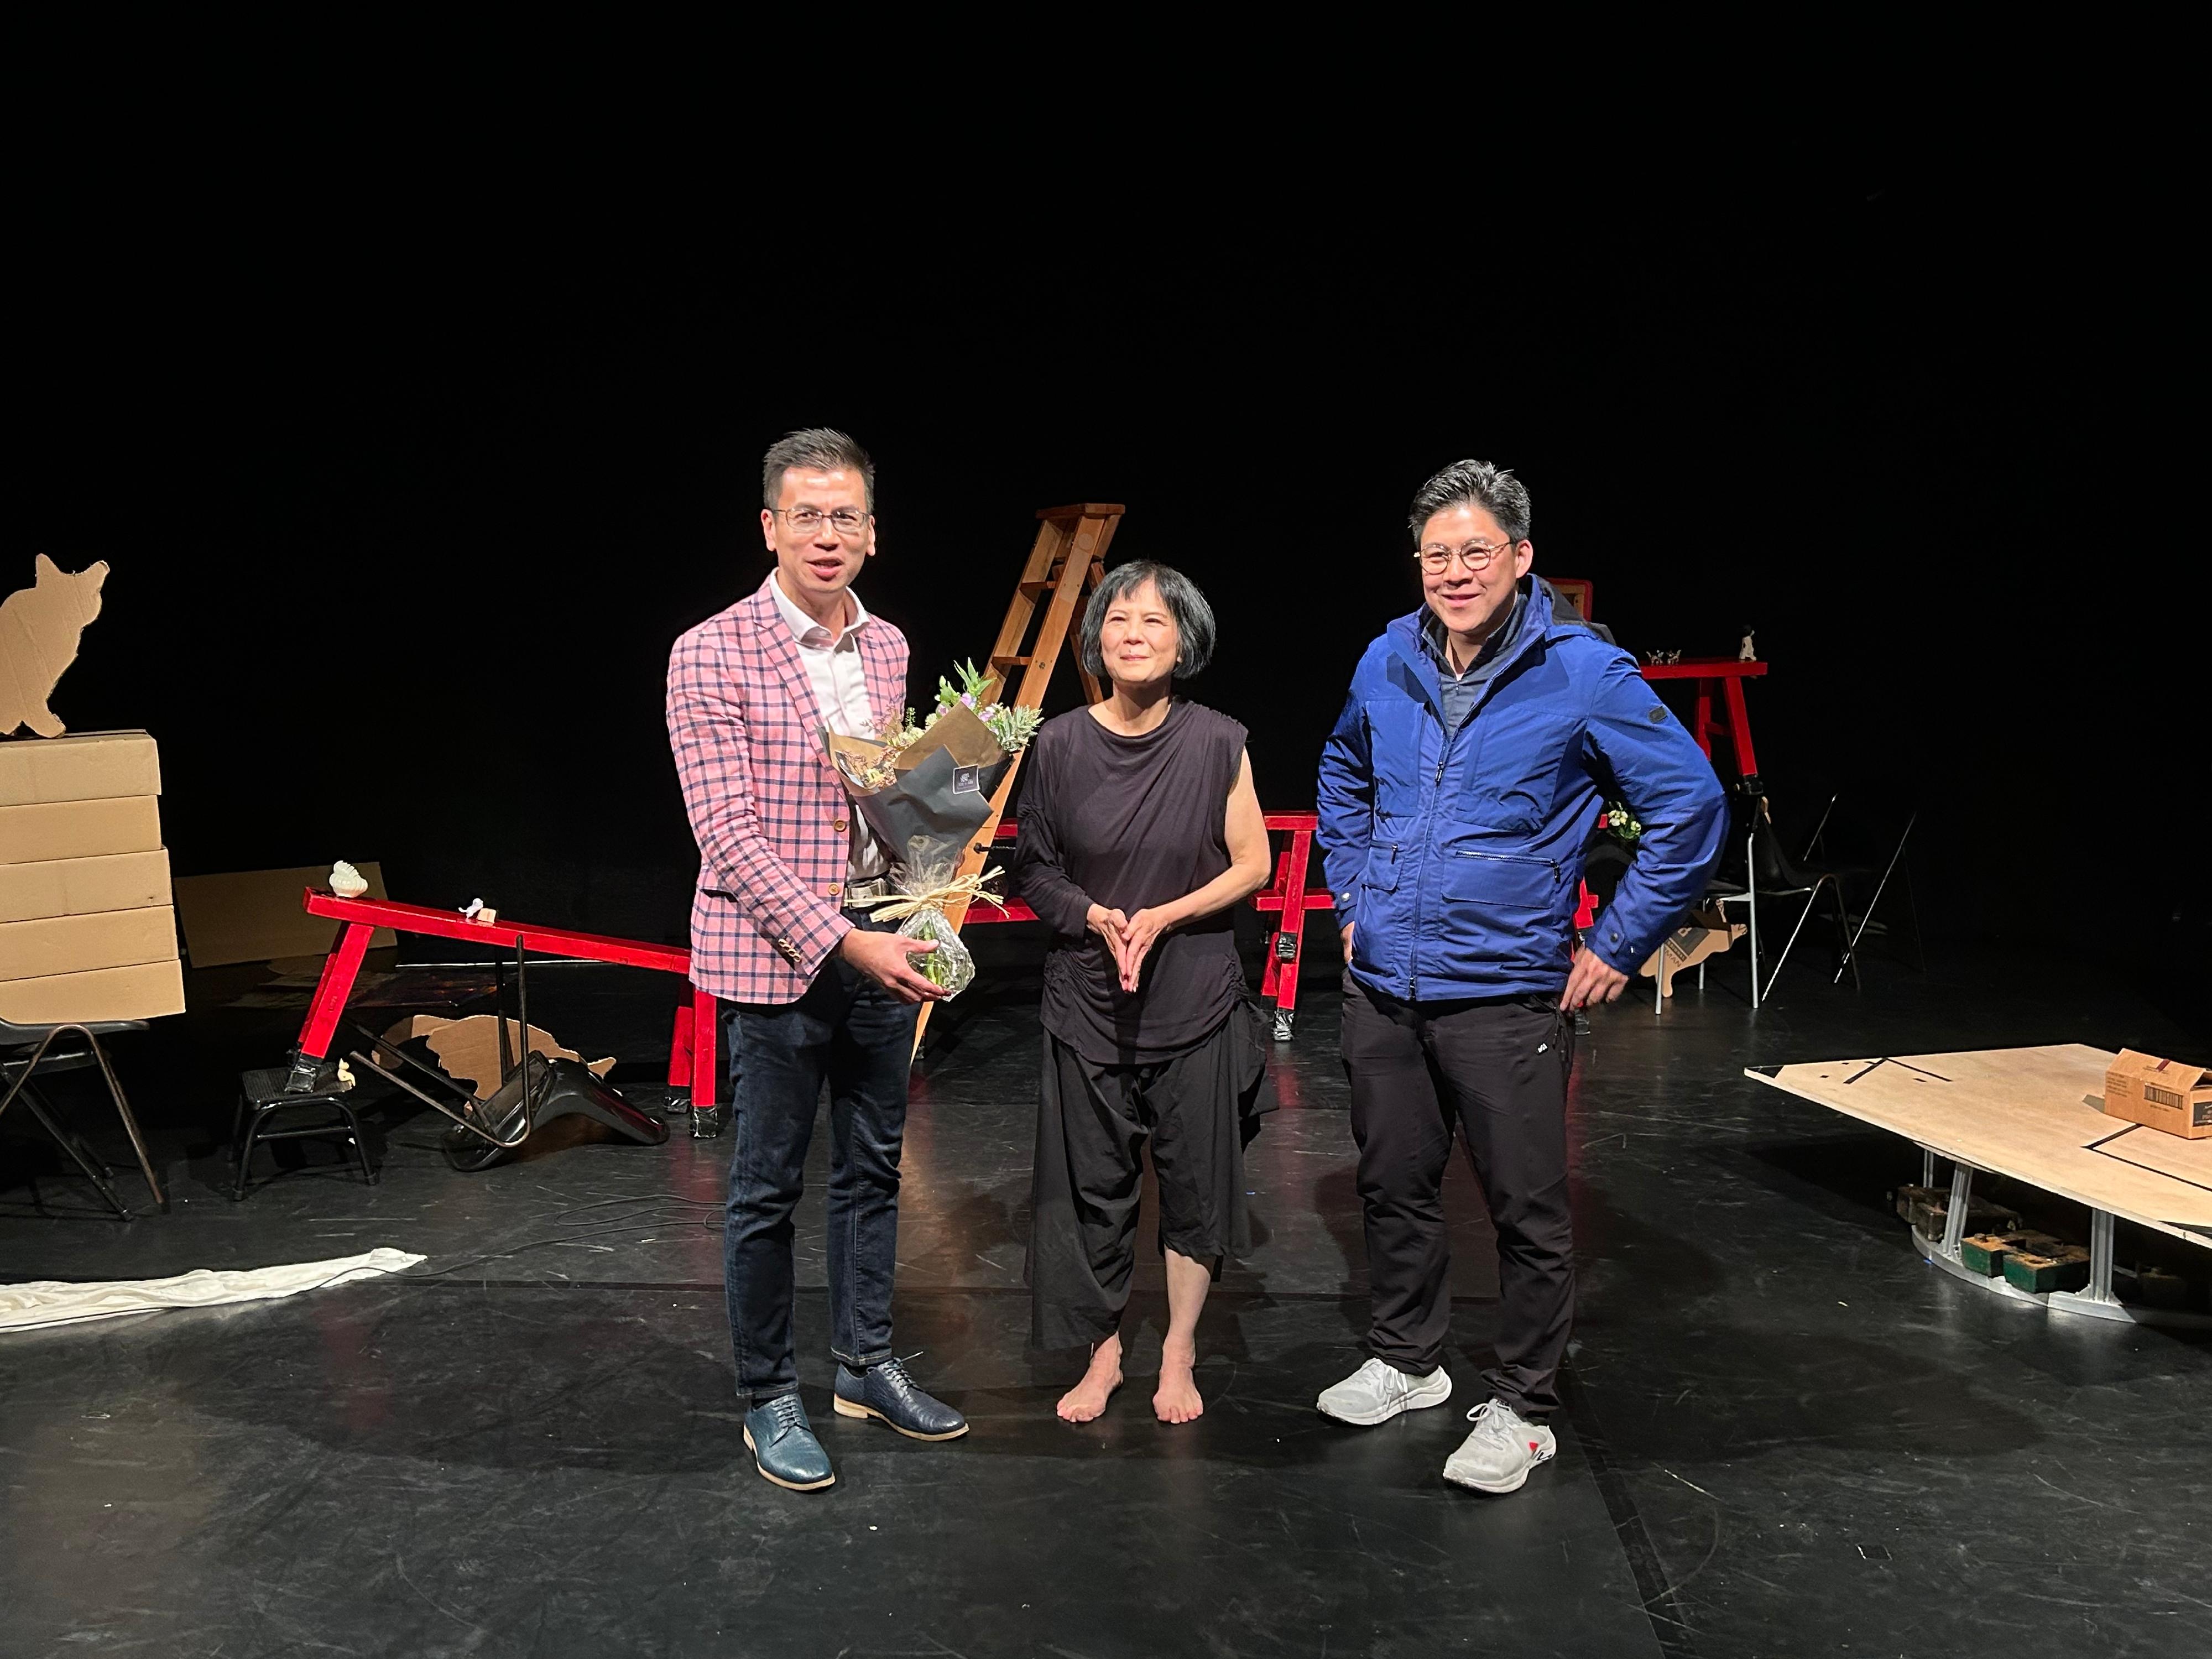 The Hong Kong Economic and Trade Office, London (London ETO) supported three Hong Kong performance programmes to stage the good stories of Hong Kong at the Edinburgh Festival Fringe in Edinburgh, United Kingdom. Photo shows the Director-General of the London ETO, Mr Gilford Law (left) and the Chairman of the Hong Kong Arts Development Council, Mr Kenneth Fok (right), with Mui Cheuk-yin (centre) after her performance on August 9 (London time).